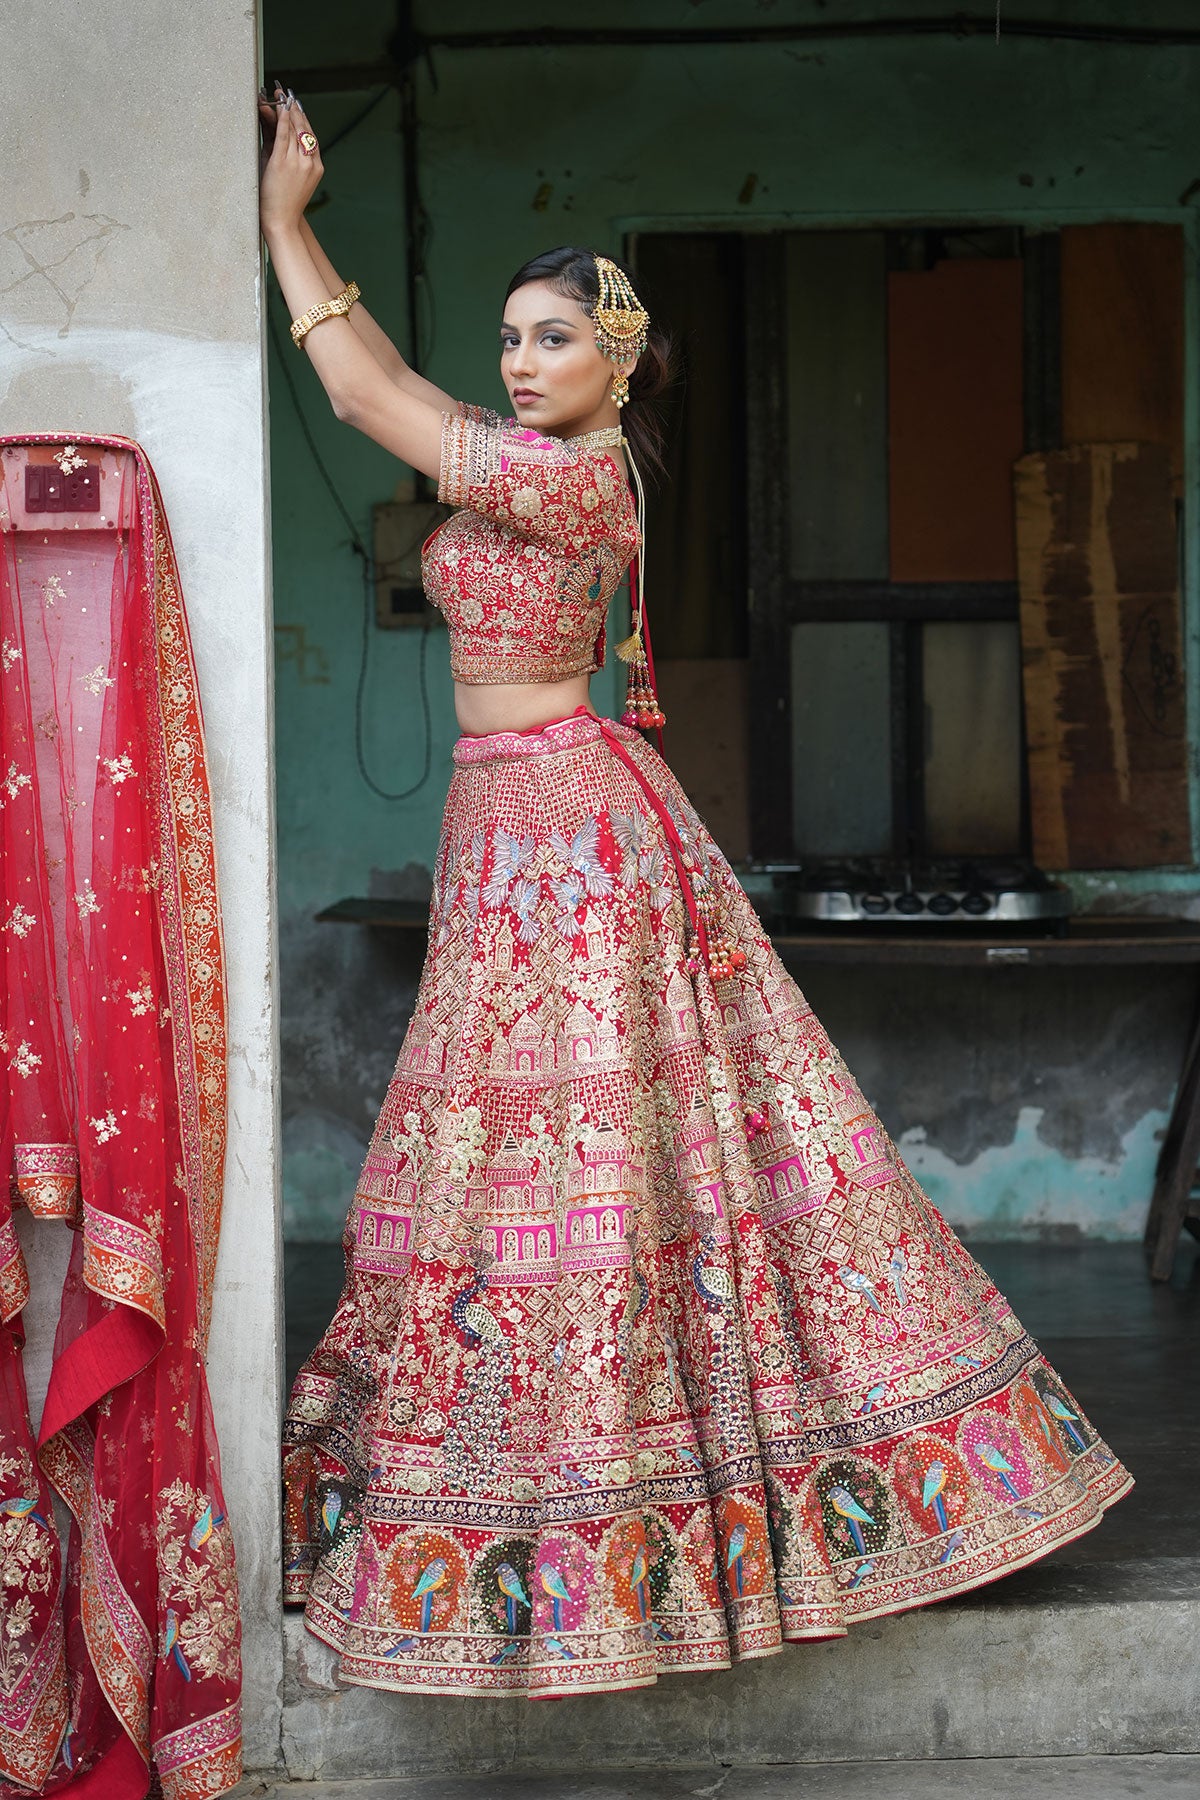 Red Bridal Lehenga Choli adorned with hand embroidery